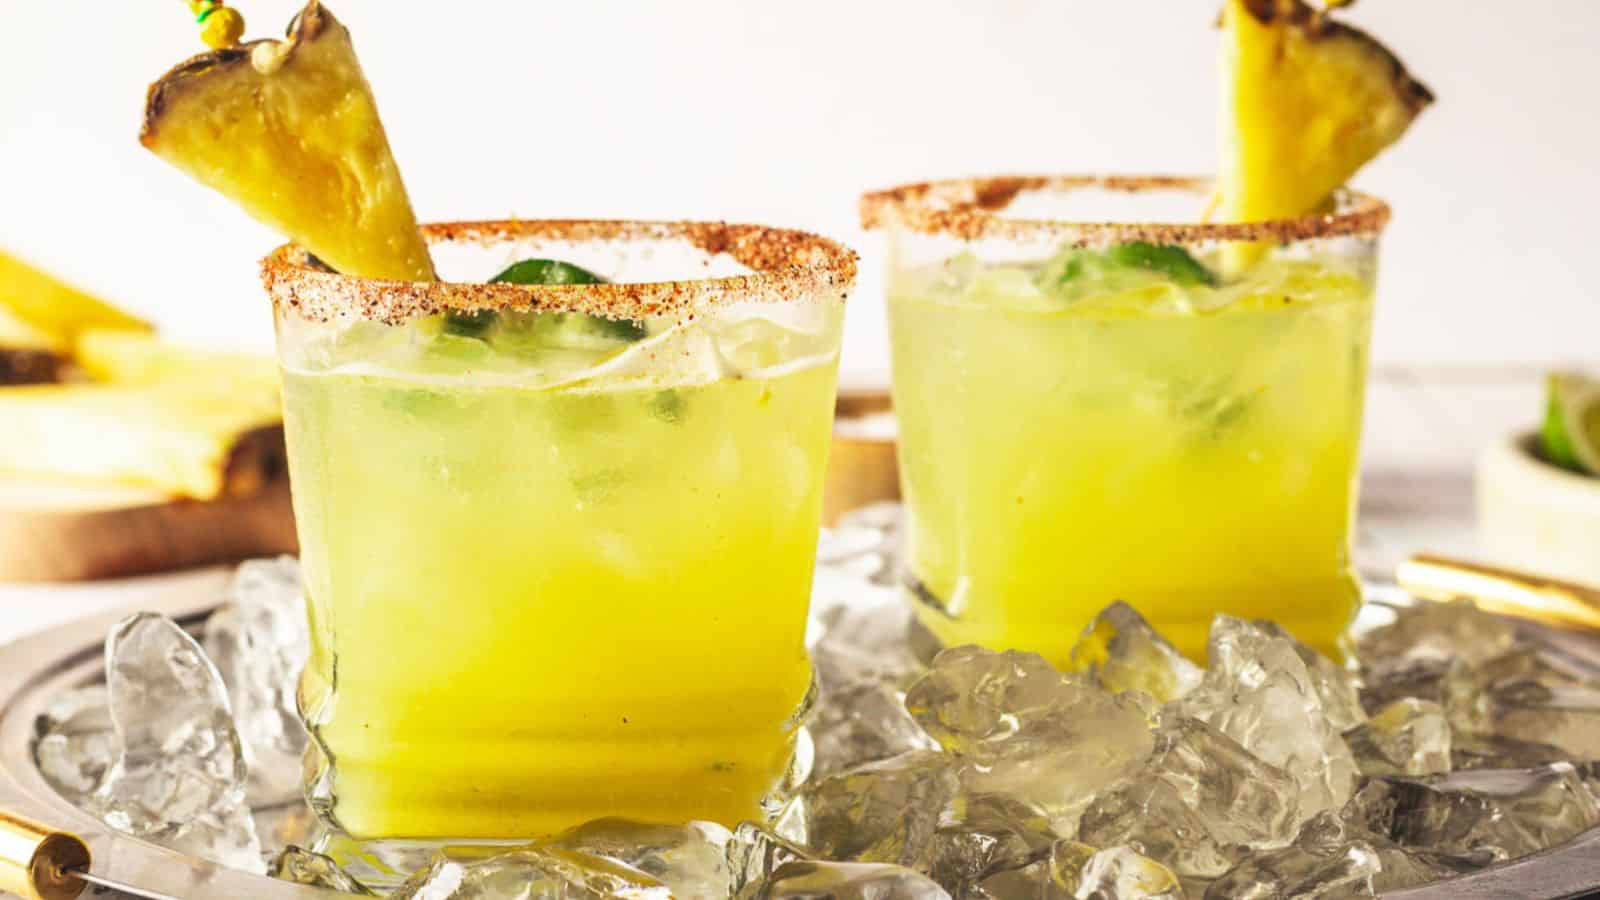 Two spicy margaritas with a pineapple garnish on a tray.